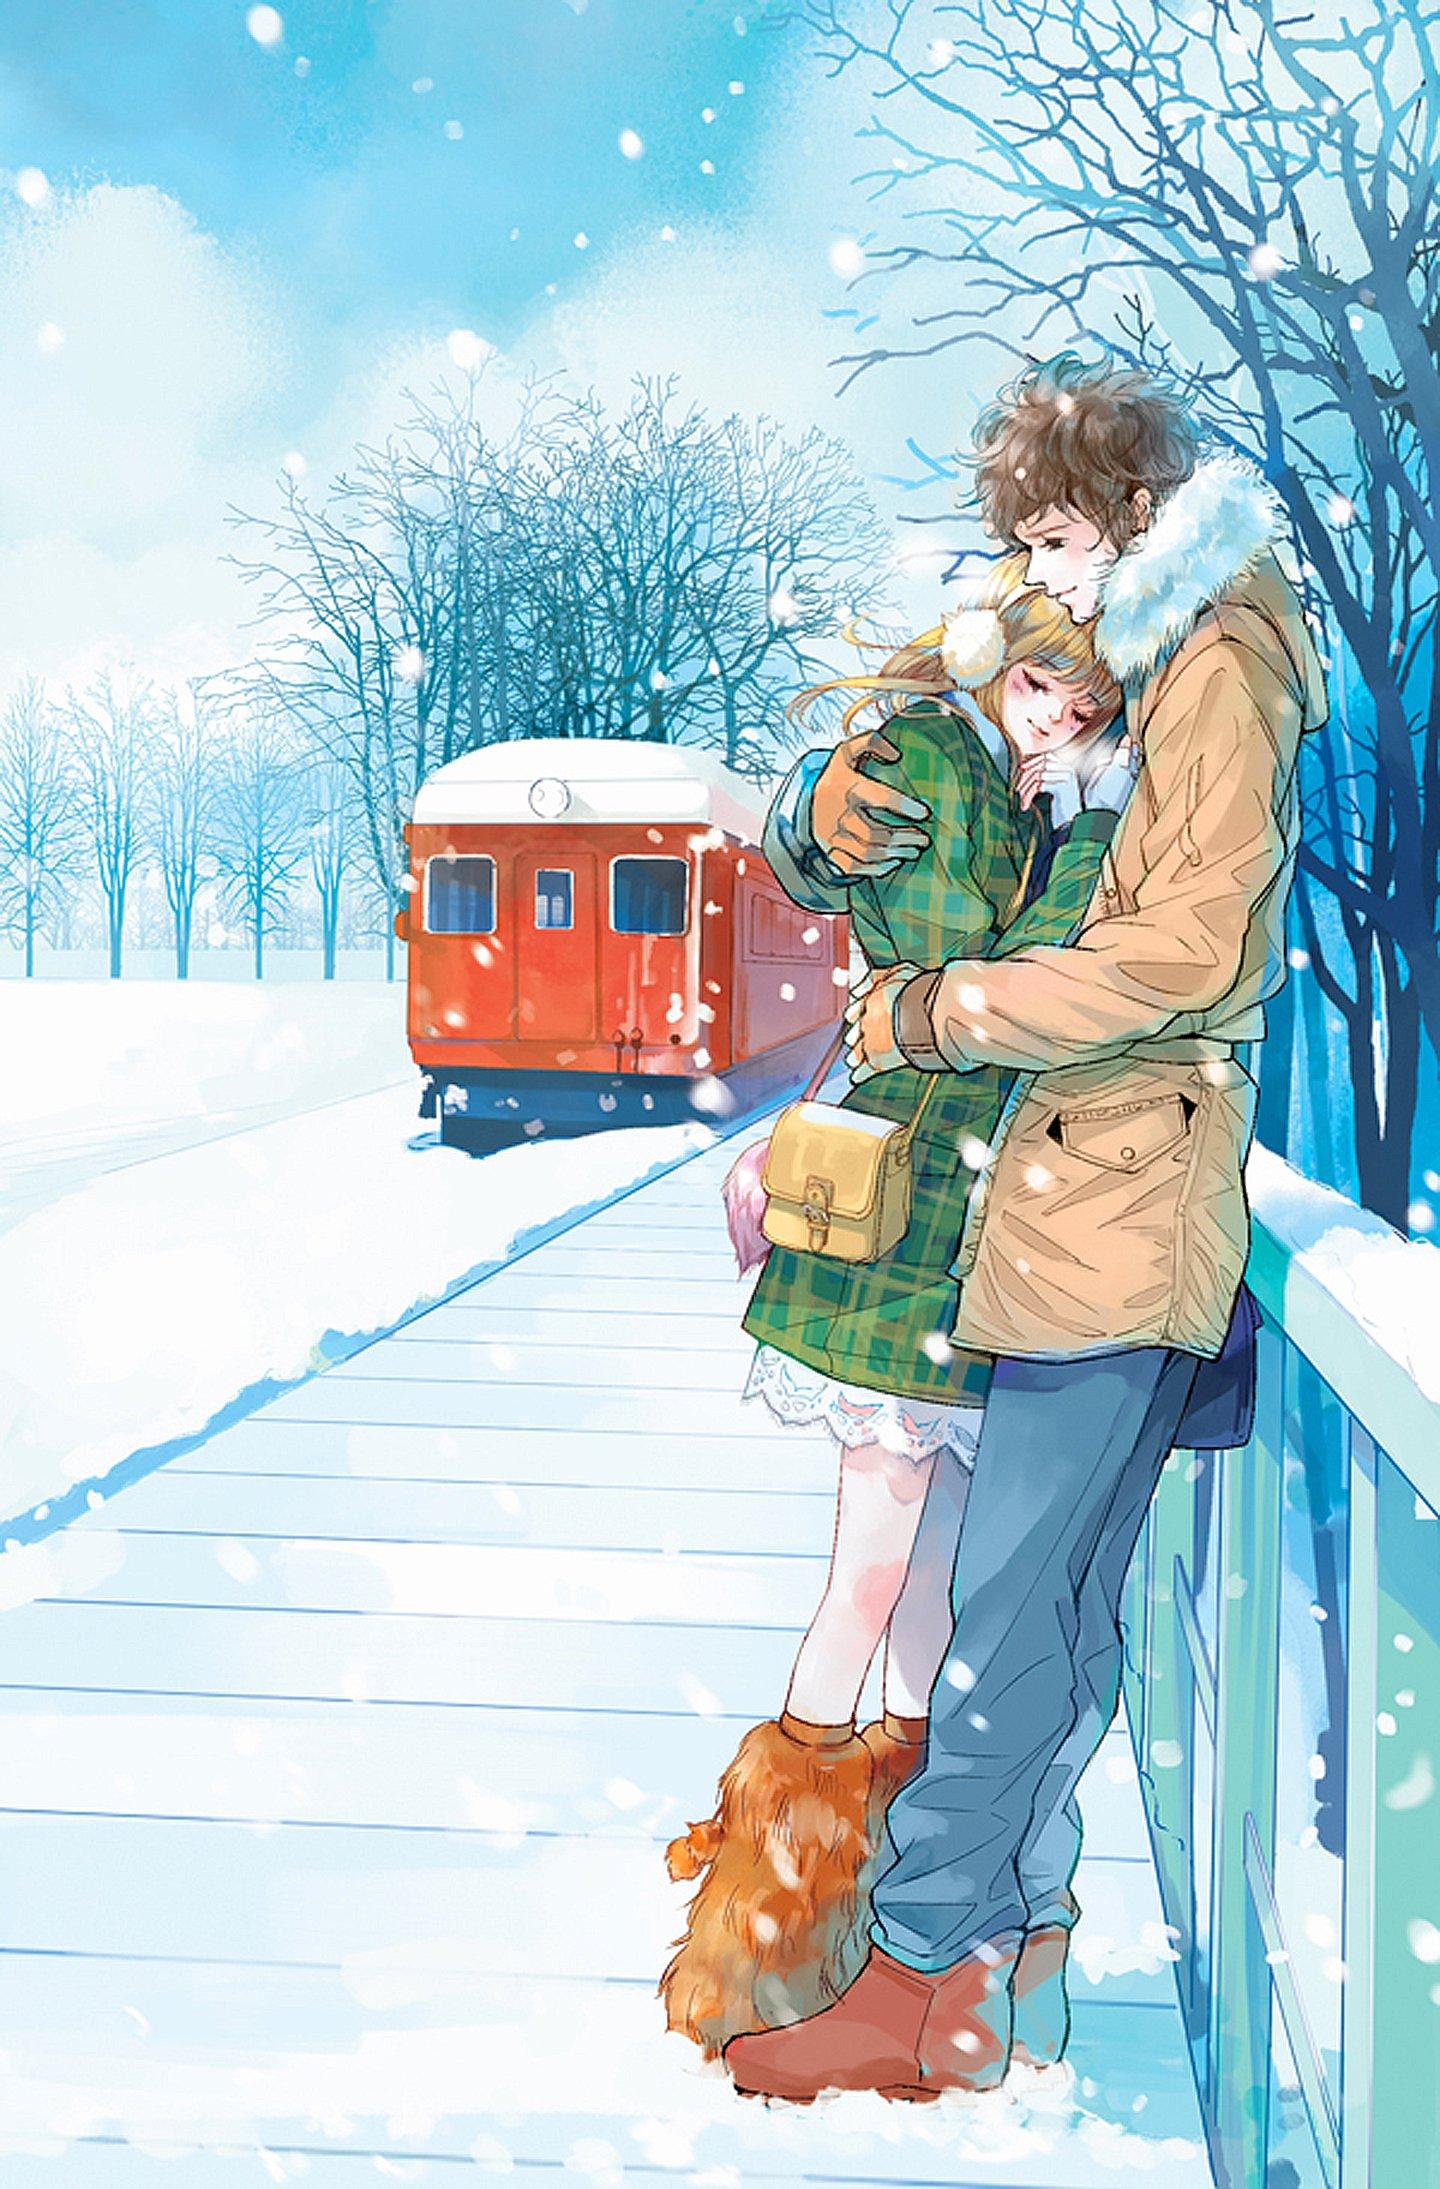 red, Train, Anime, Couple, Snow, Romantic, Love, Tree Wallpaper HD / Desktop and Mobile Background